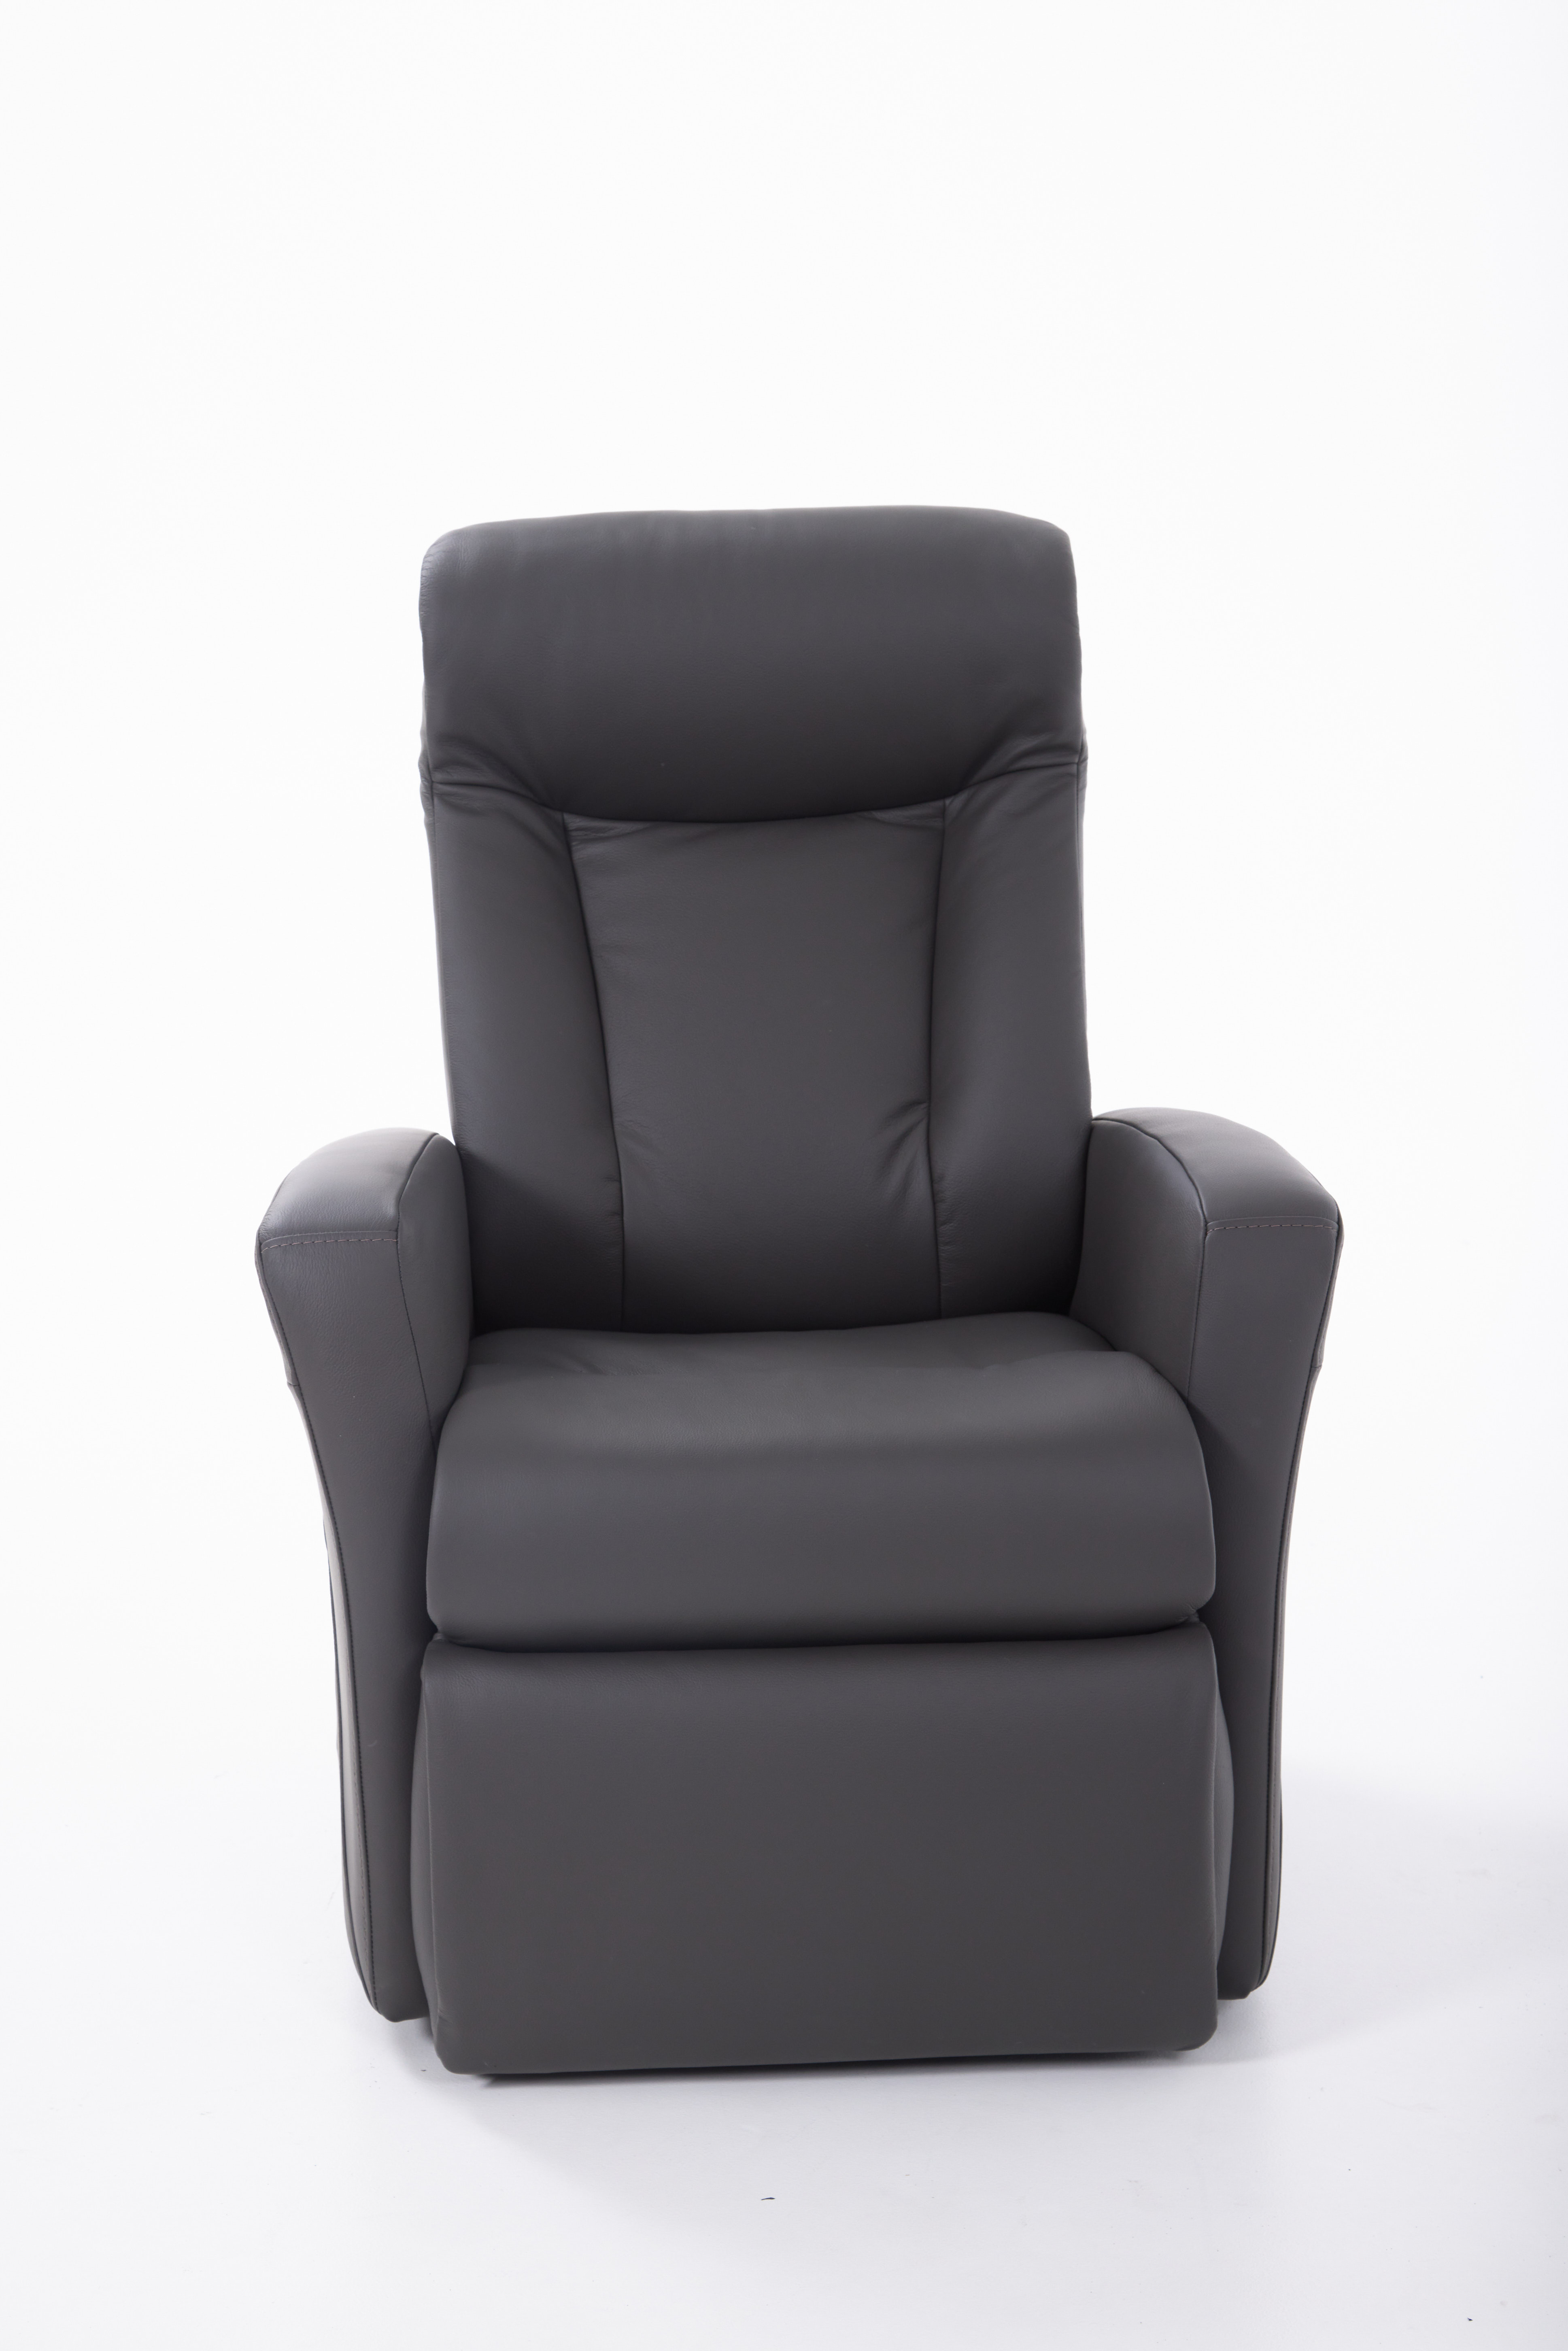 Nordic Spirit Prince Rise and Recline Chair Prime Grey